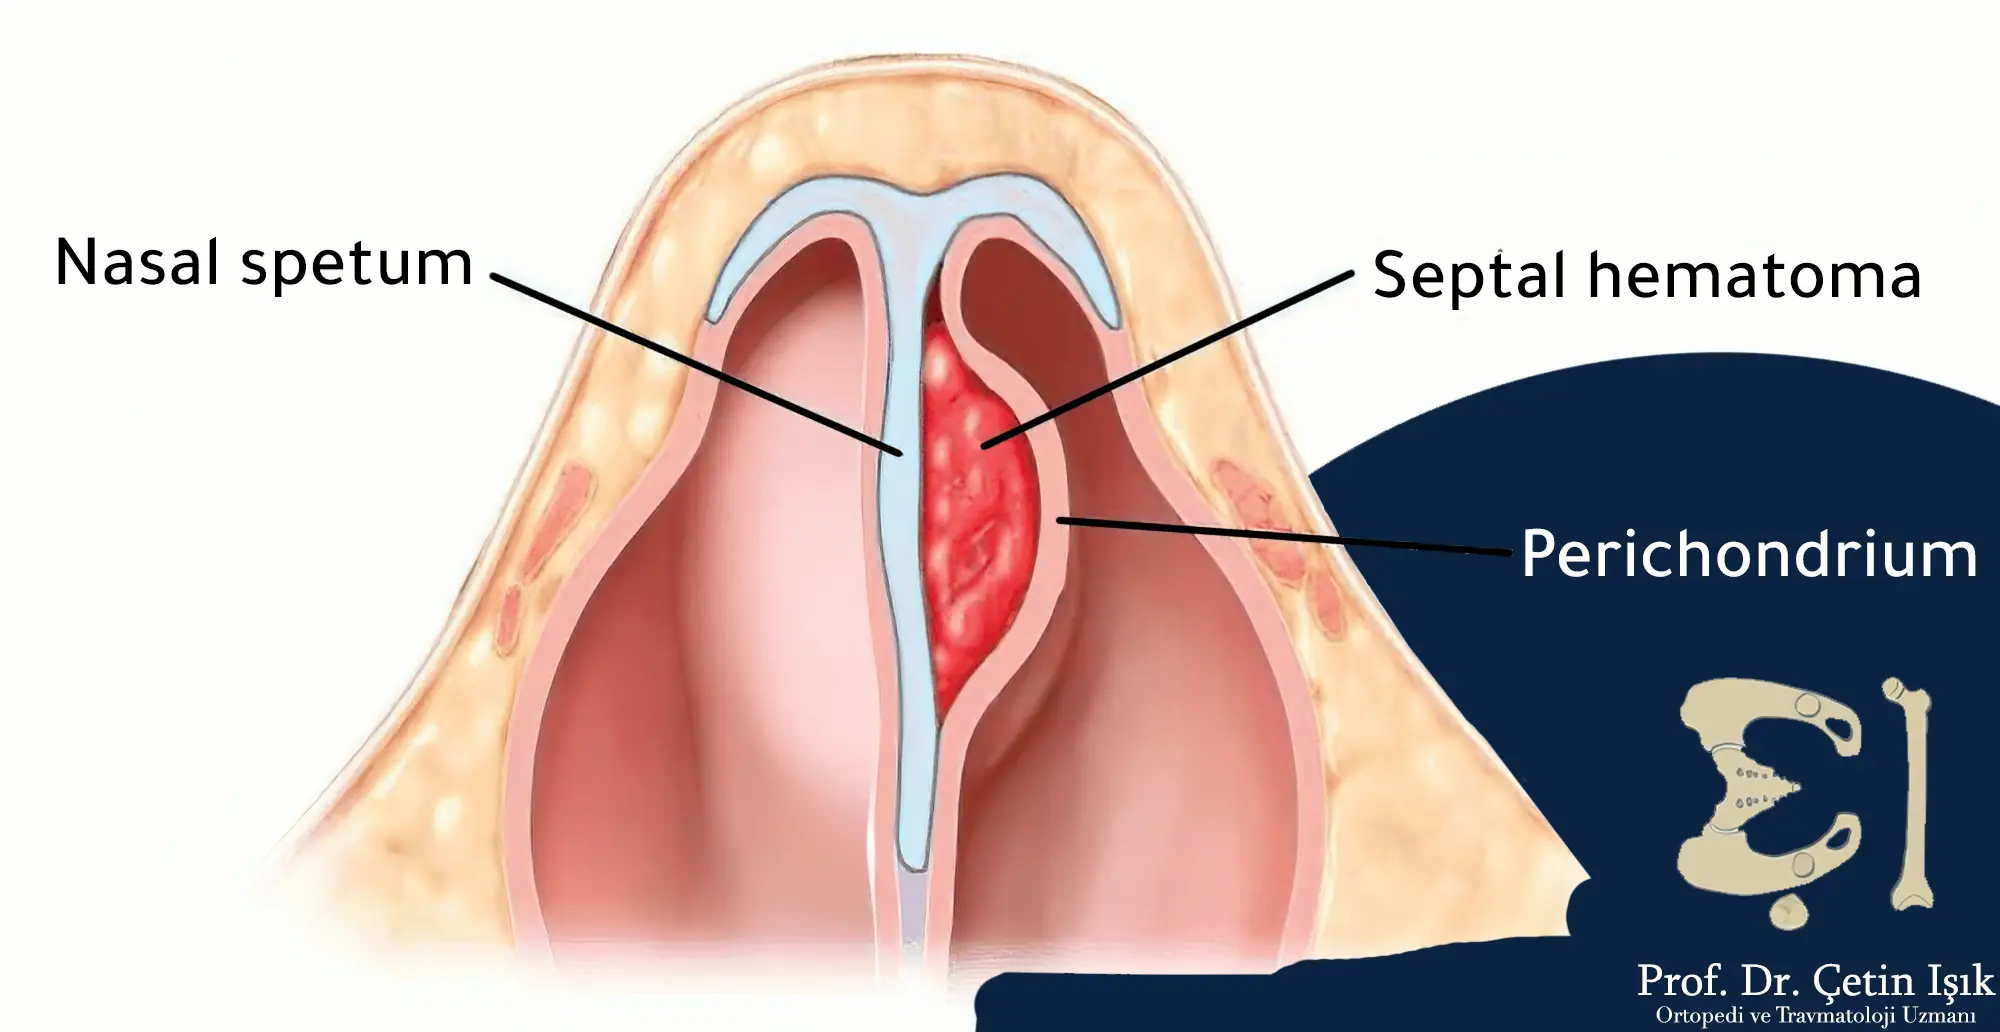 An image showing the formation of a hematoma on the nasal septum and its pressure on the cartilage beneath it